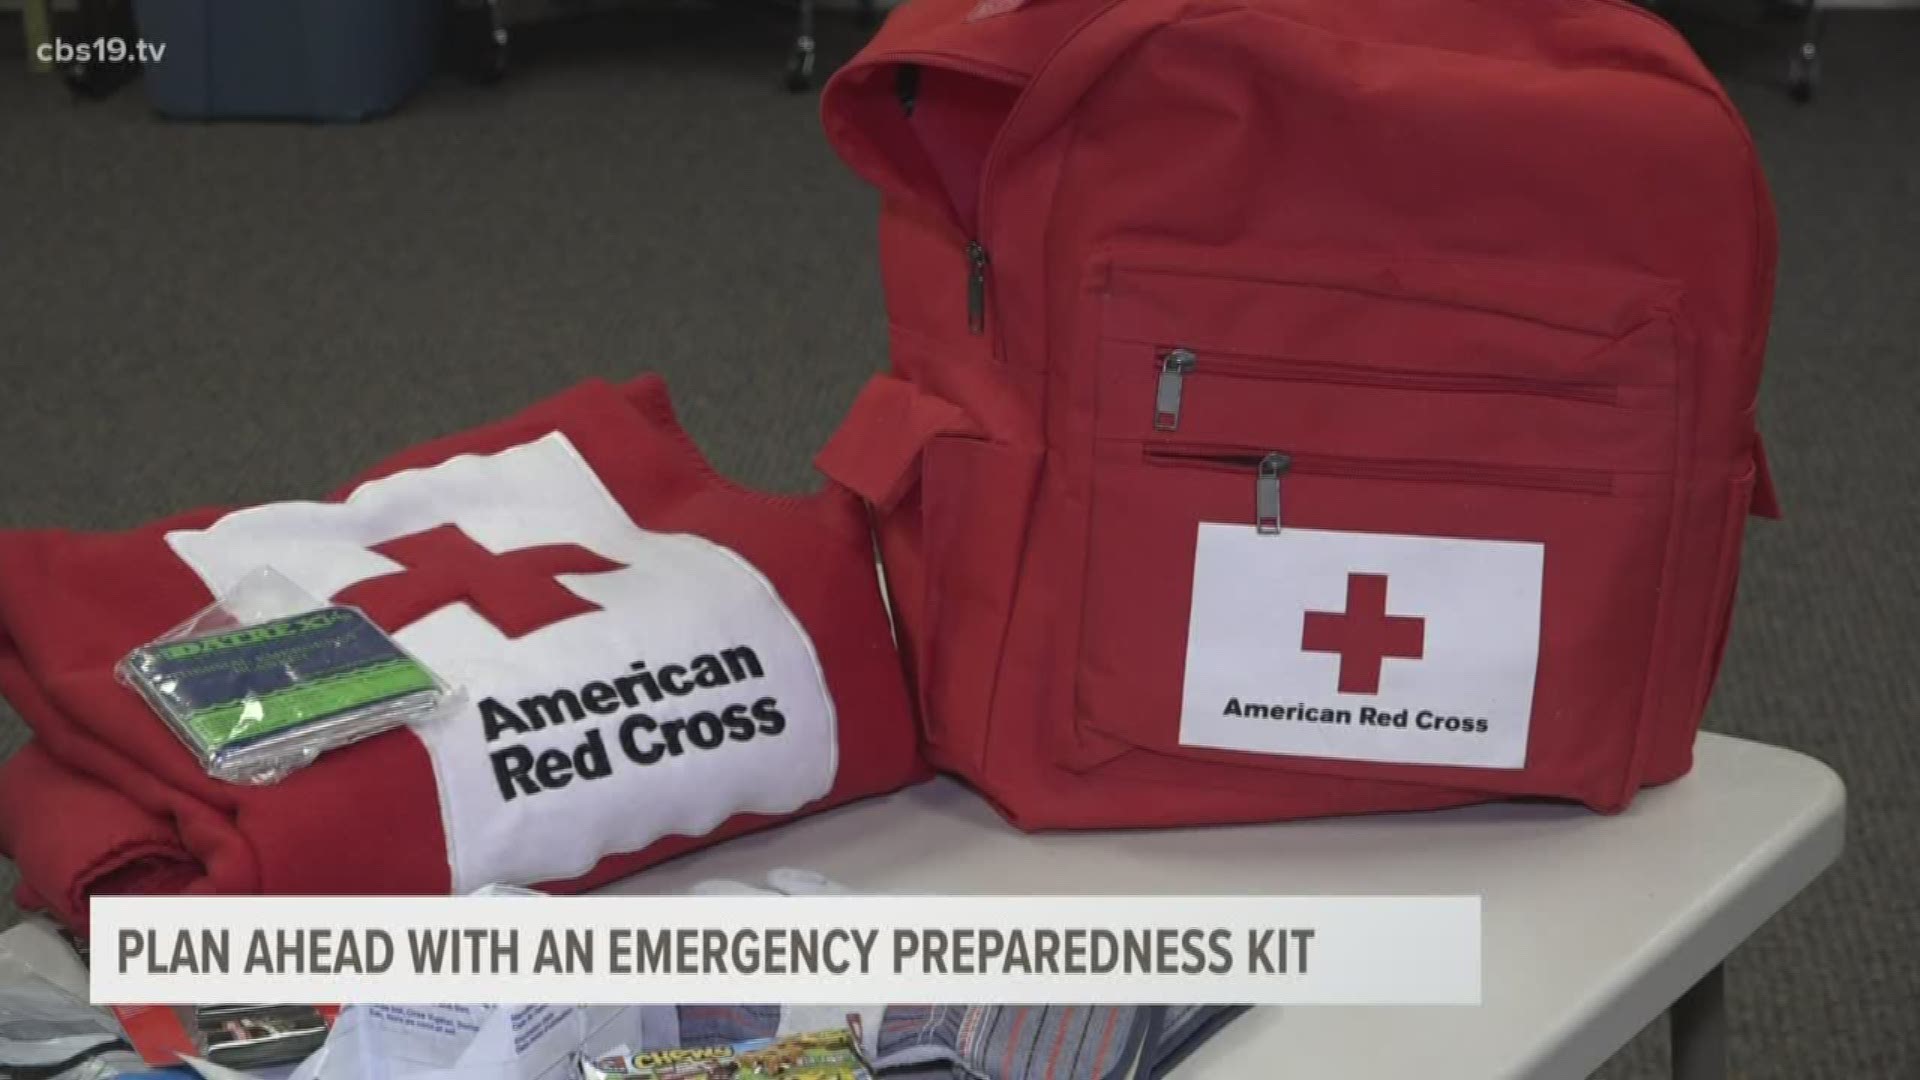 In the event of a natural disaster the American Red Cross suggest having an emergency kit handy and ready to go.